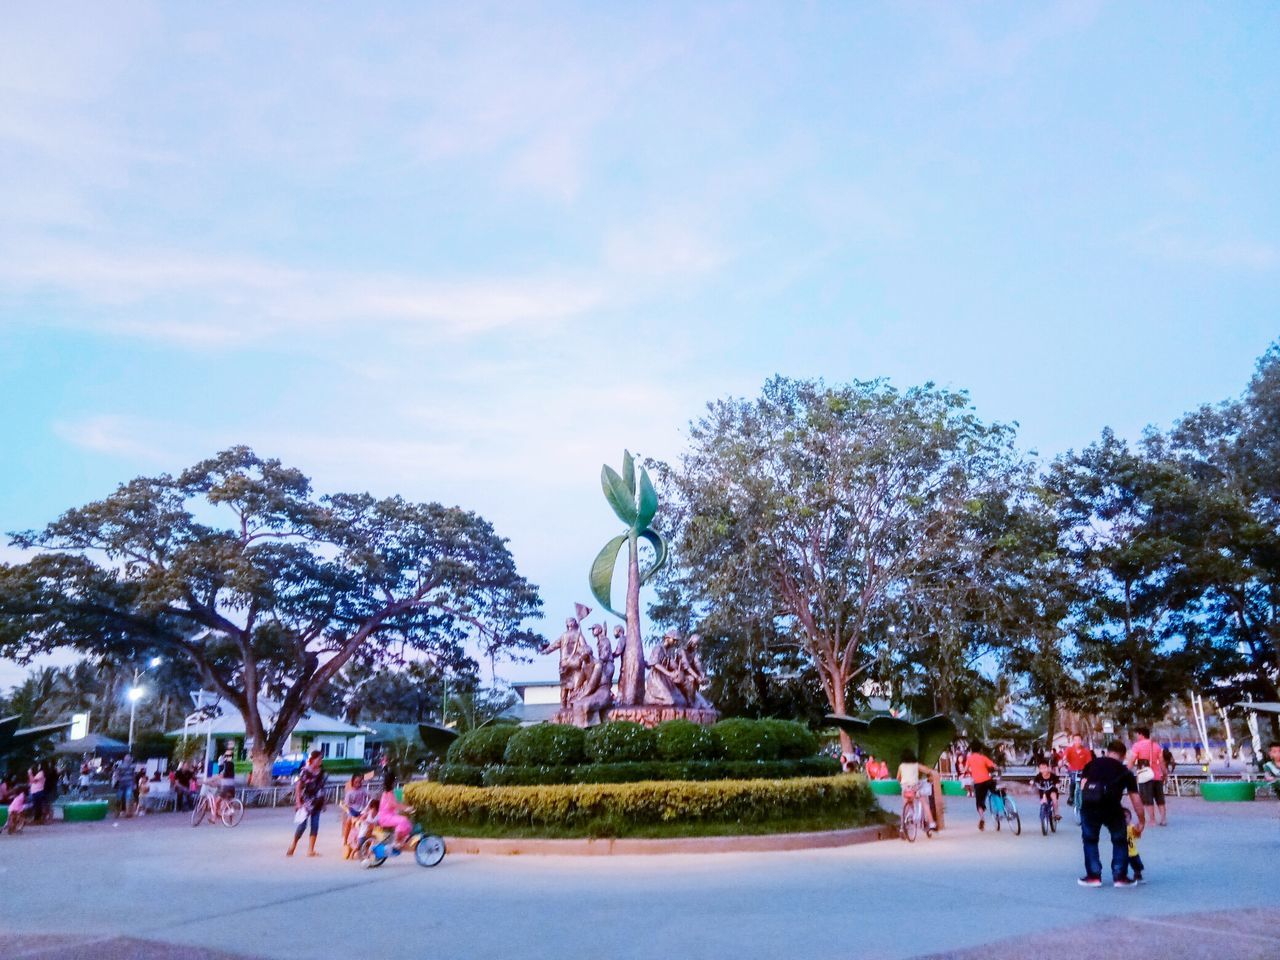 GROUP OF PEOPLE IN THE PARK